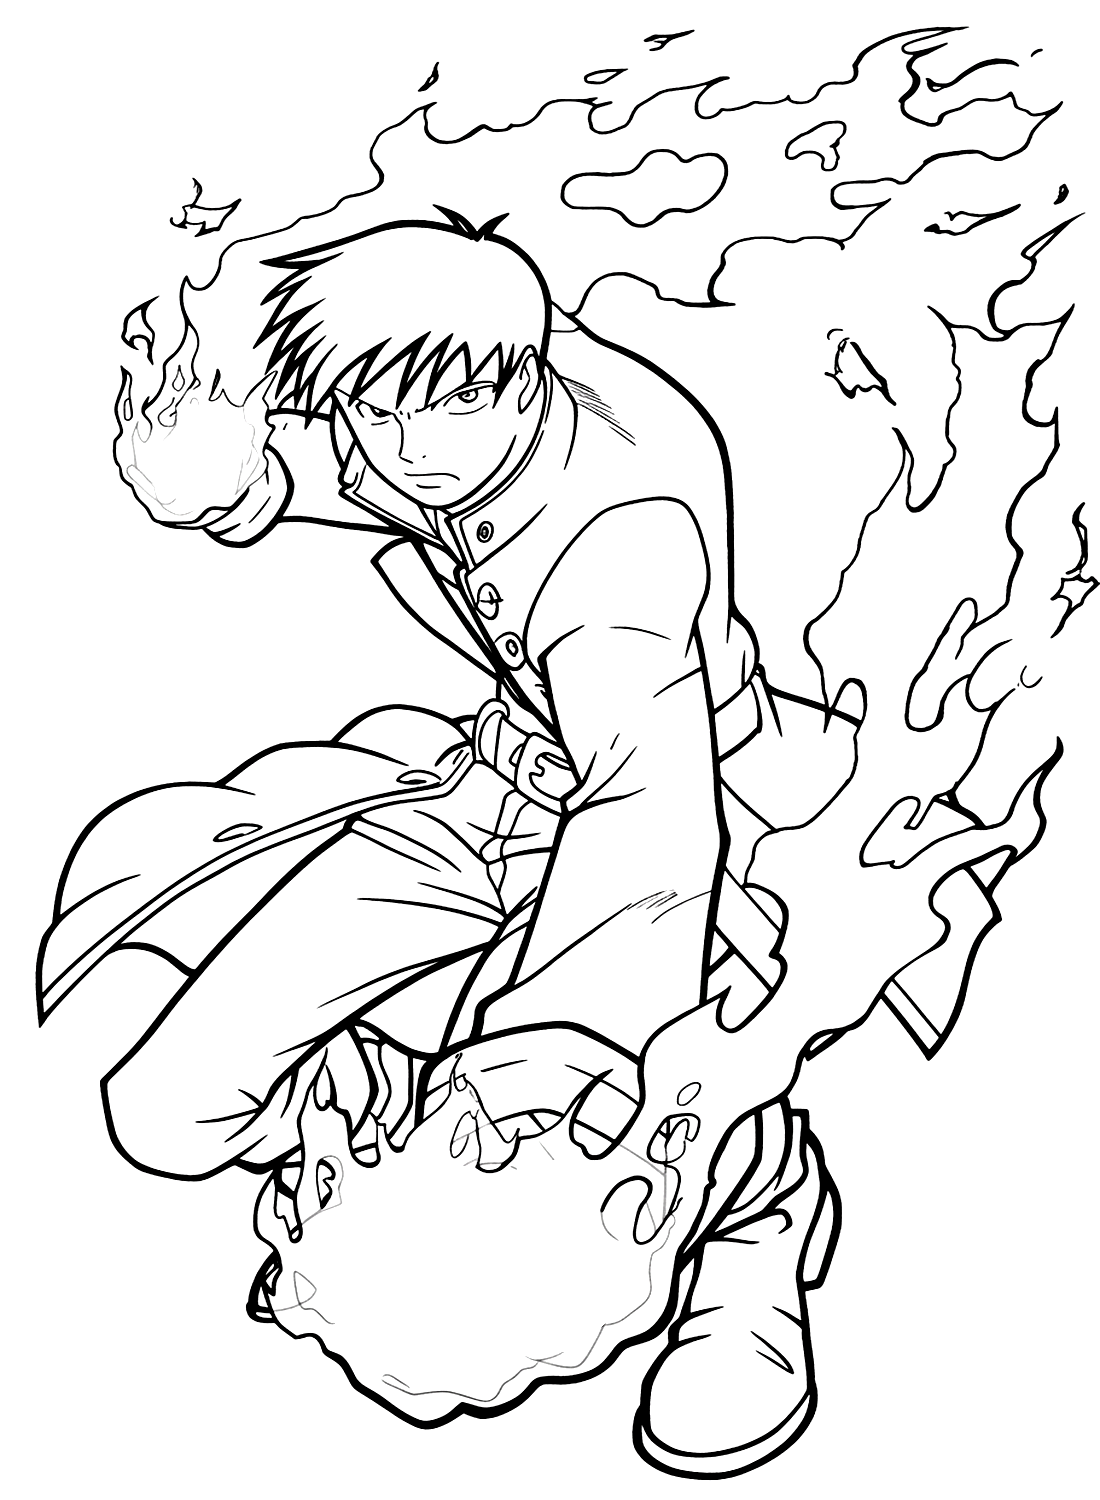 Download Roy Mustang Coloring Page - Free Printable Coloring Pages